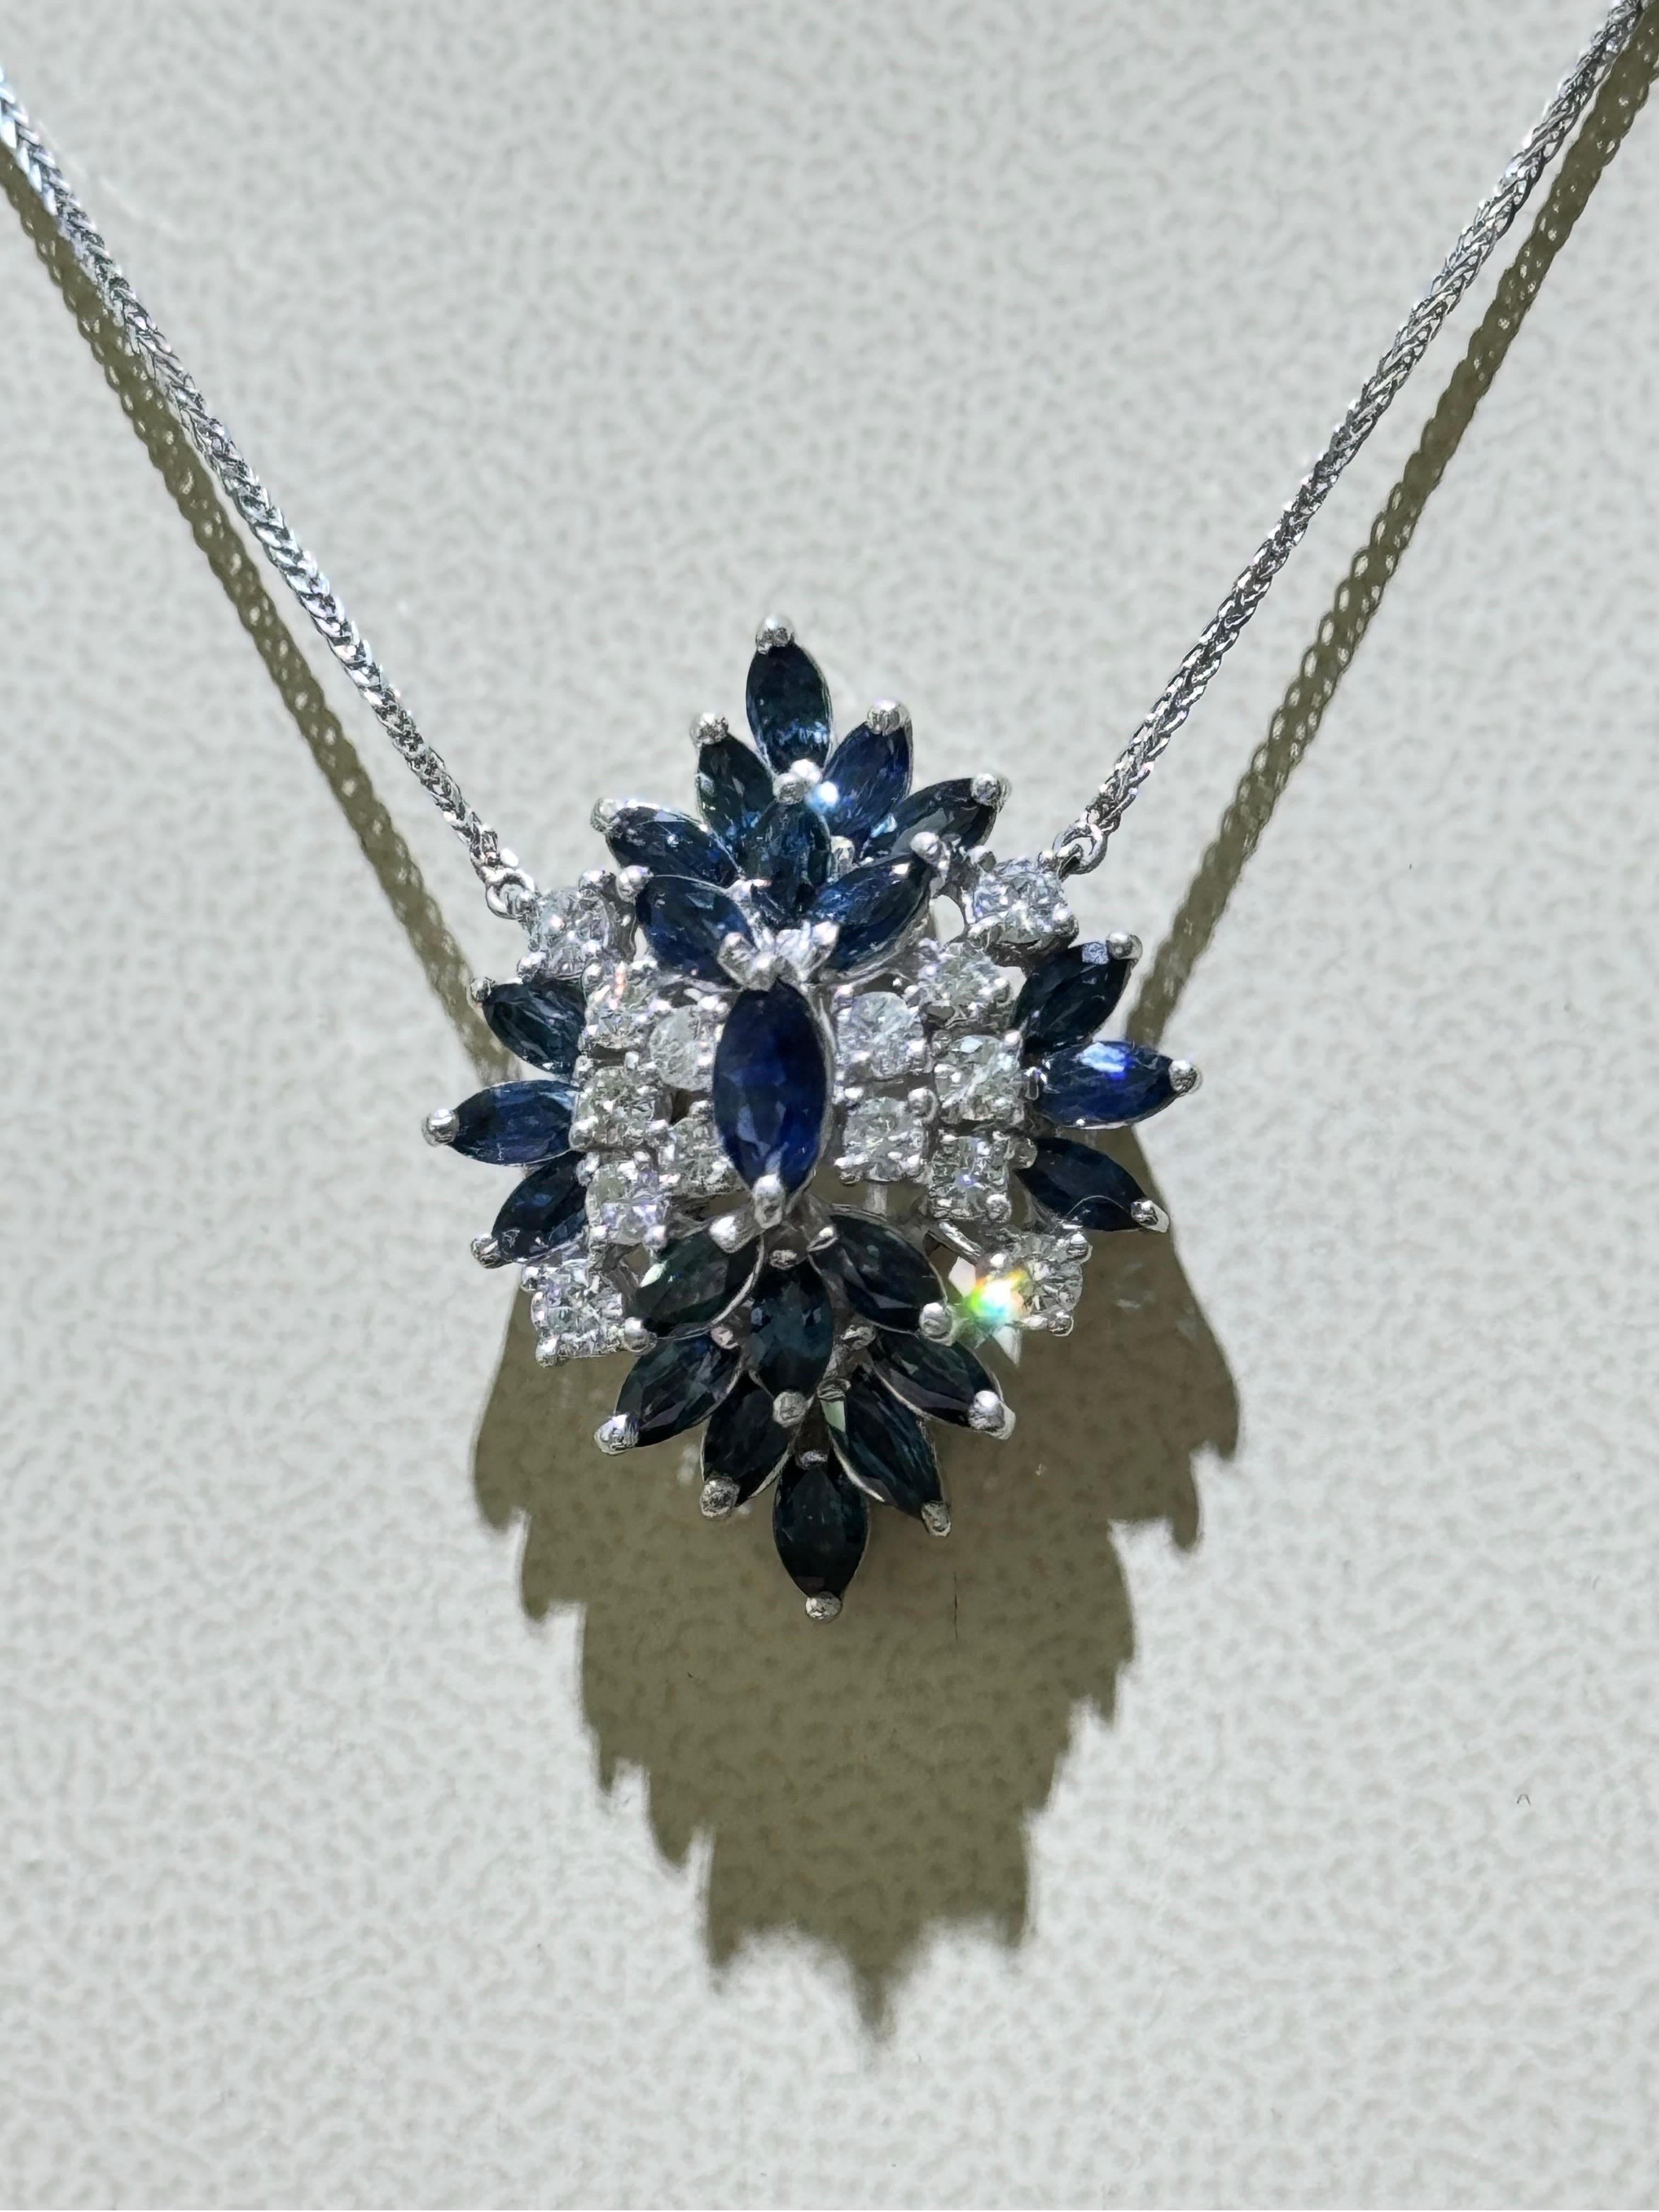 Gorgeous Blue Sapphire And Diamond Necklace In 14k White Gold ,

Chain is 18k white gold 18” long,

Pendant is in 14k white gold, approximately 1 1/4” long.

Approximately 1.4 carats in diamonds.